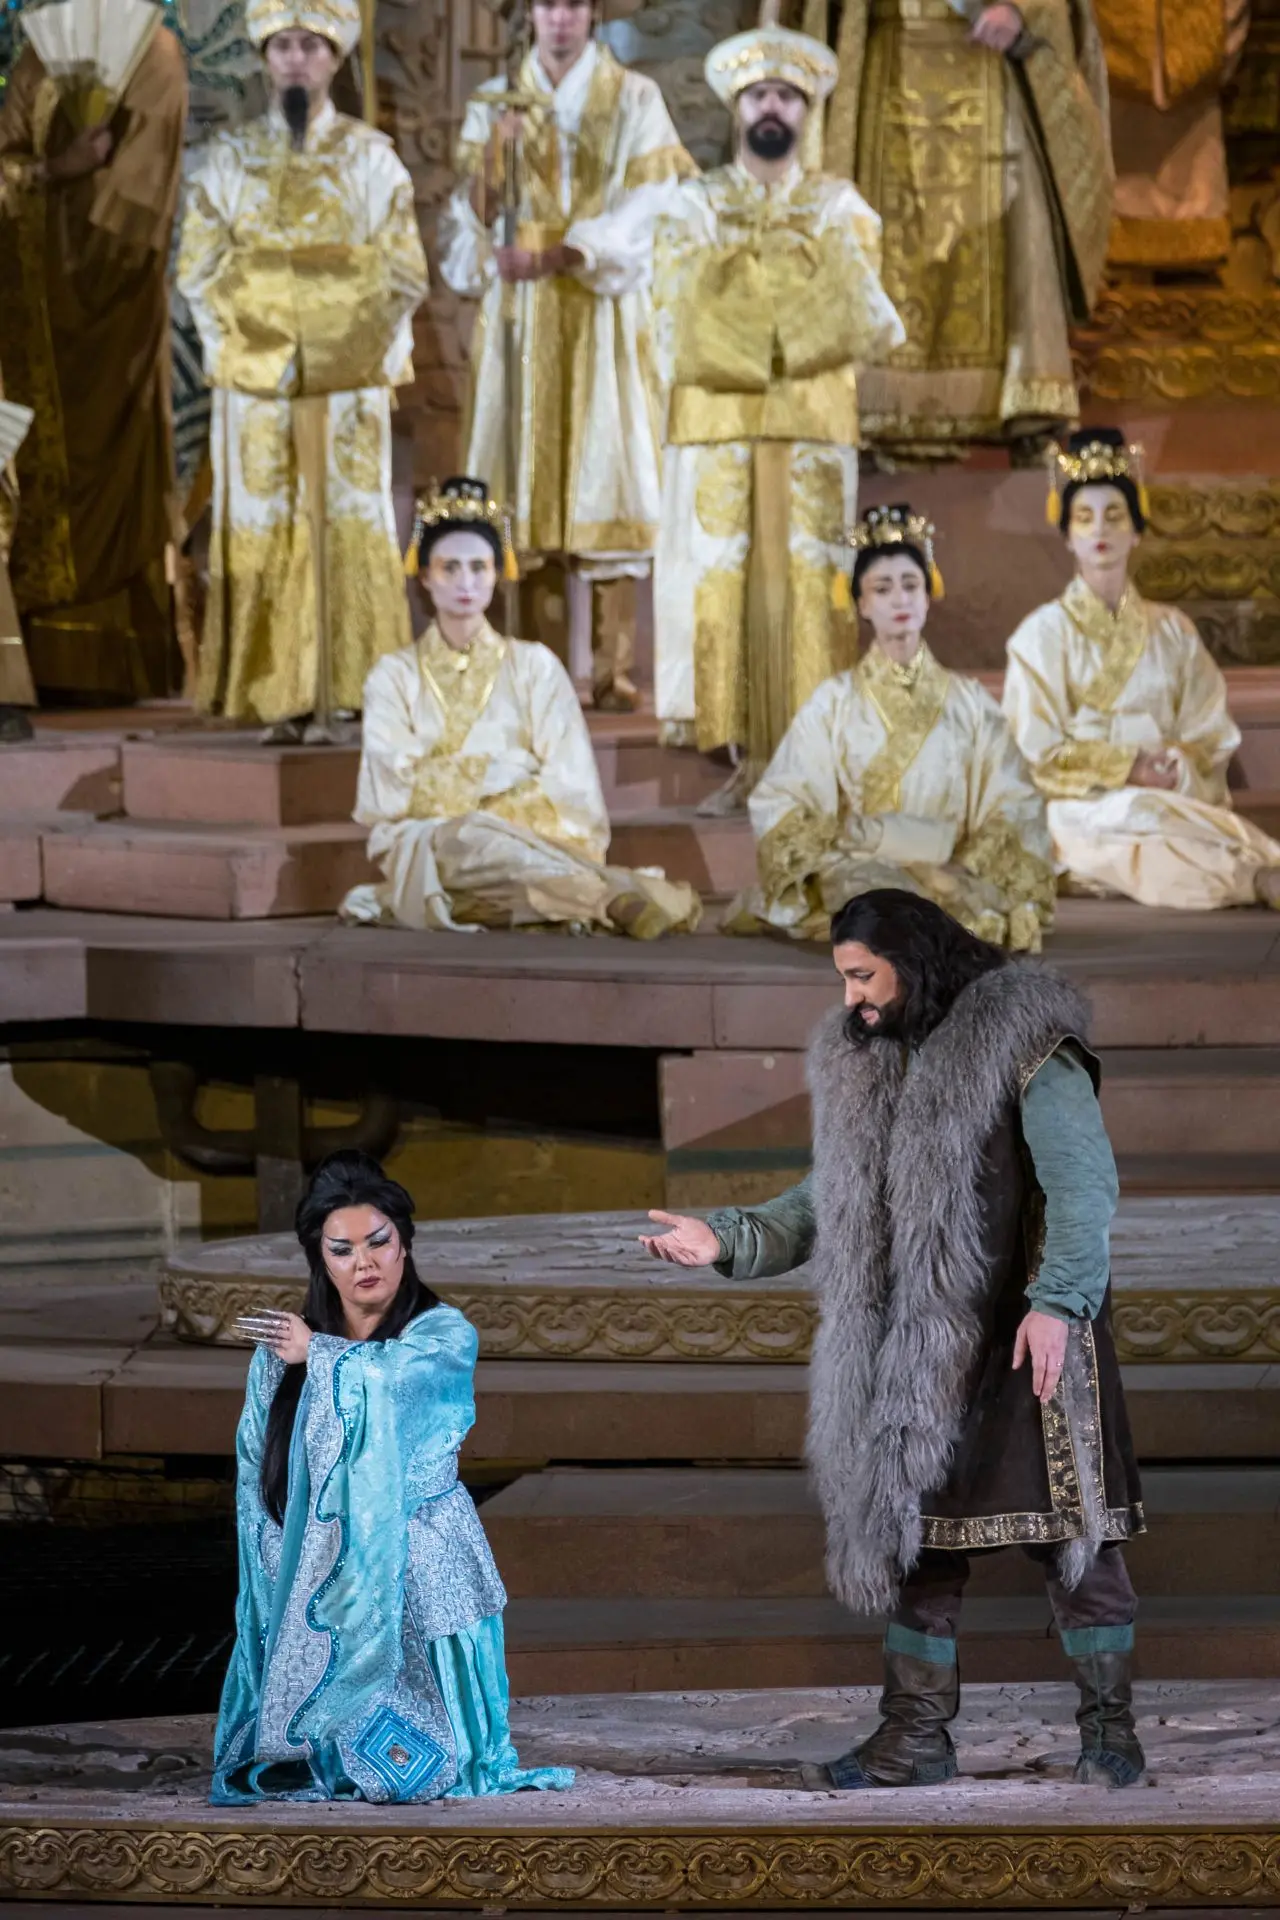 At center stage kneels princess Turandot. To her left is Calàf, dressed the same as in the previous picture. Turandot is wearing a pale ice blue robe that falls to her feet, with sleeves that widen at her wrists. They are shiny and accented by rolling embroidery in sky blue. The shoulders are padded, resembling armor. The front of the robe is decorated with shiny sky-blue bands. At her feet, only the toes of her shoes are visible, and they are same color as the robe. On her head she is wearing a headdress in the shape of silver sunburst. The tips of the rays are blue.